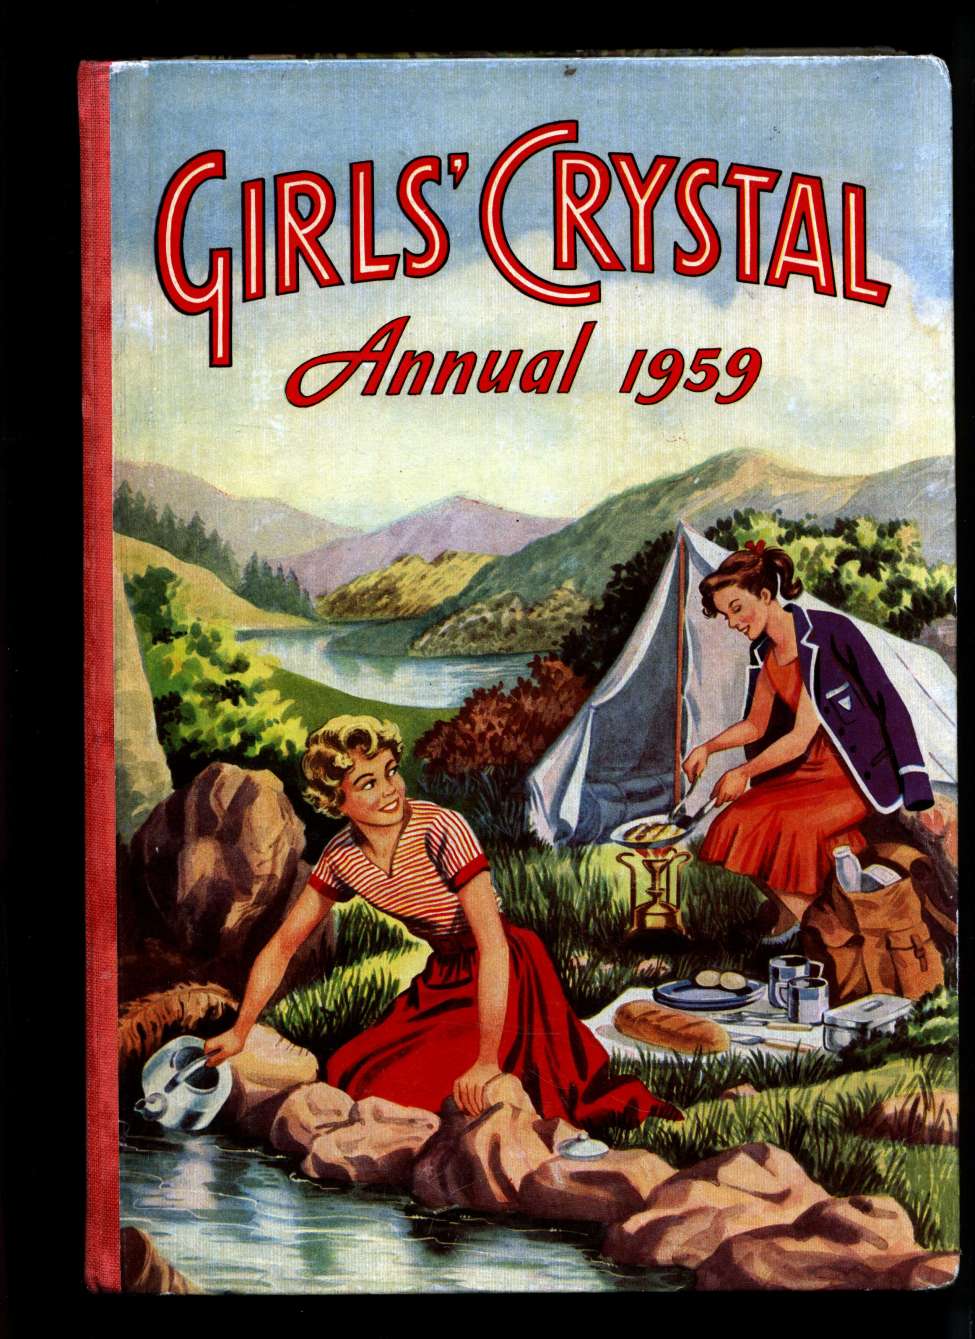 Comic Book Cover For Girls' Crystal Annual 1959